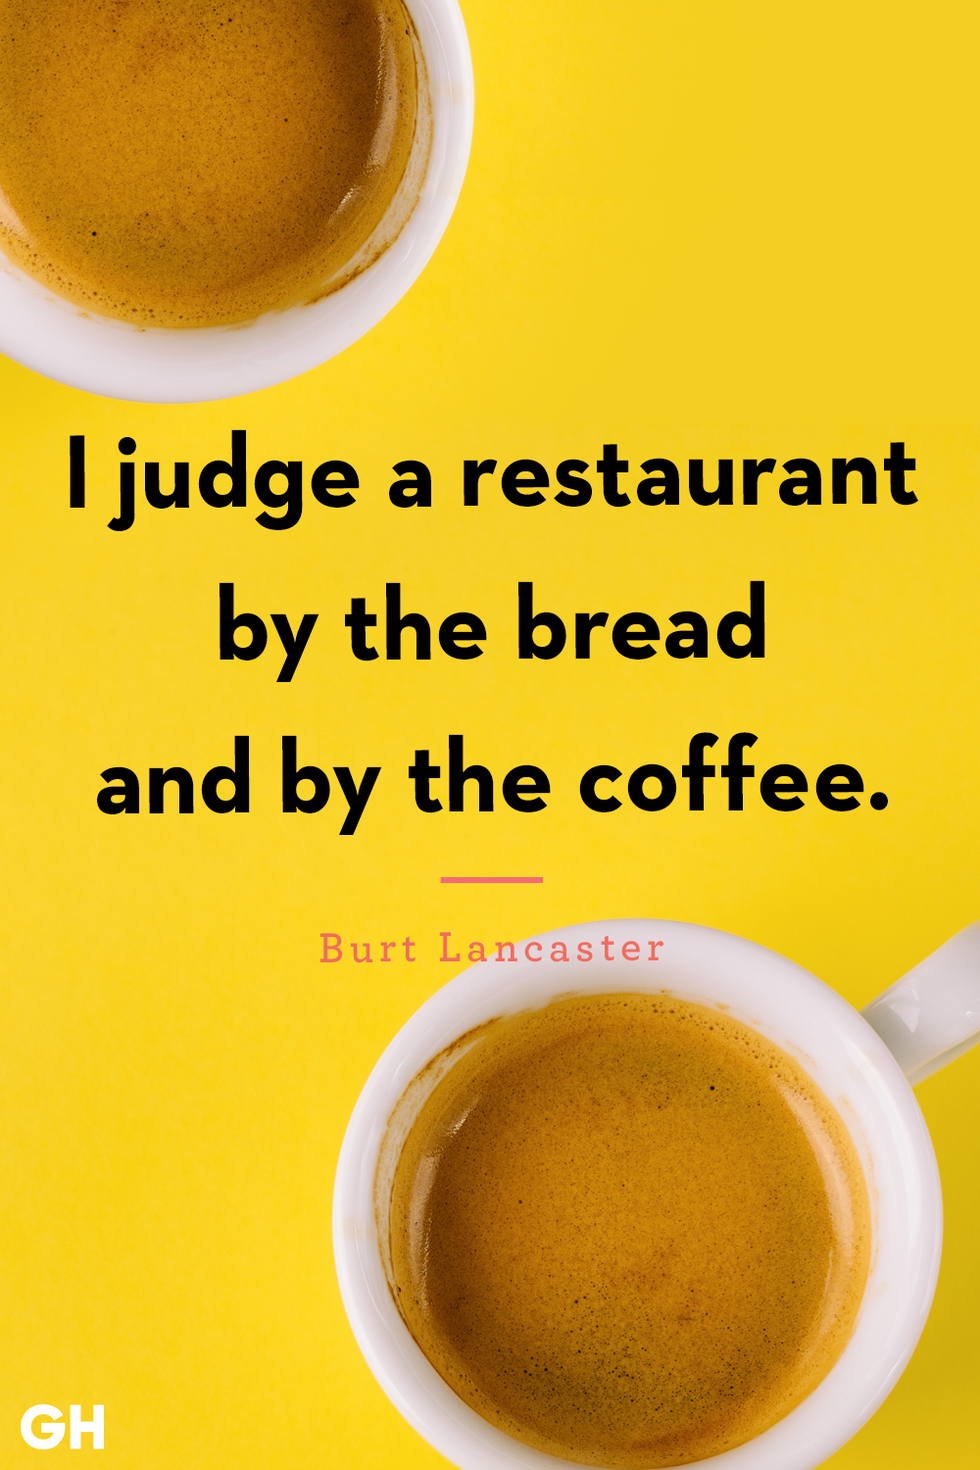 https://hips.hearstapps.com/hmg-prod/images/funny-coffee-quotes-burt-lancaster-1660850249.png?crop=1xw:1xh;center,top&resize=980:*